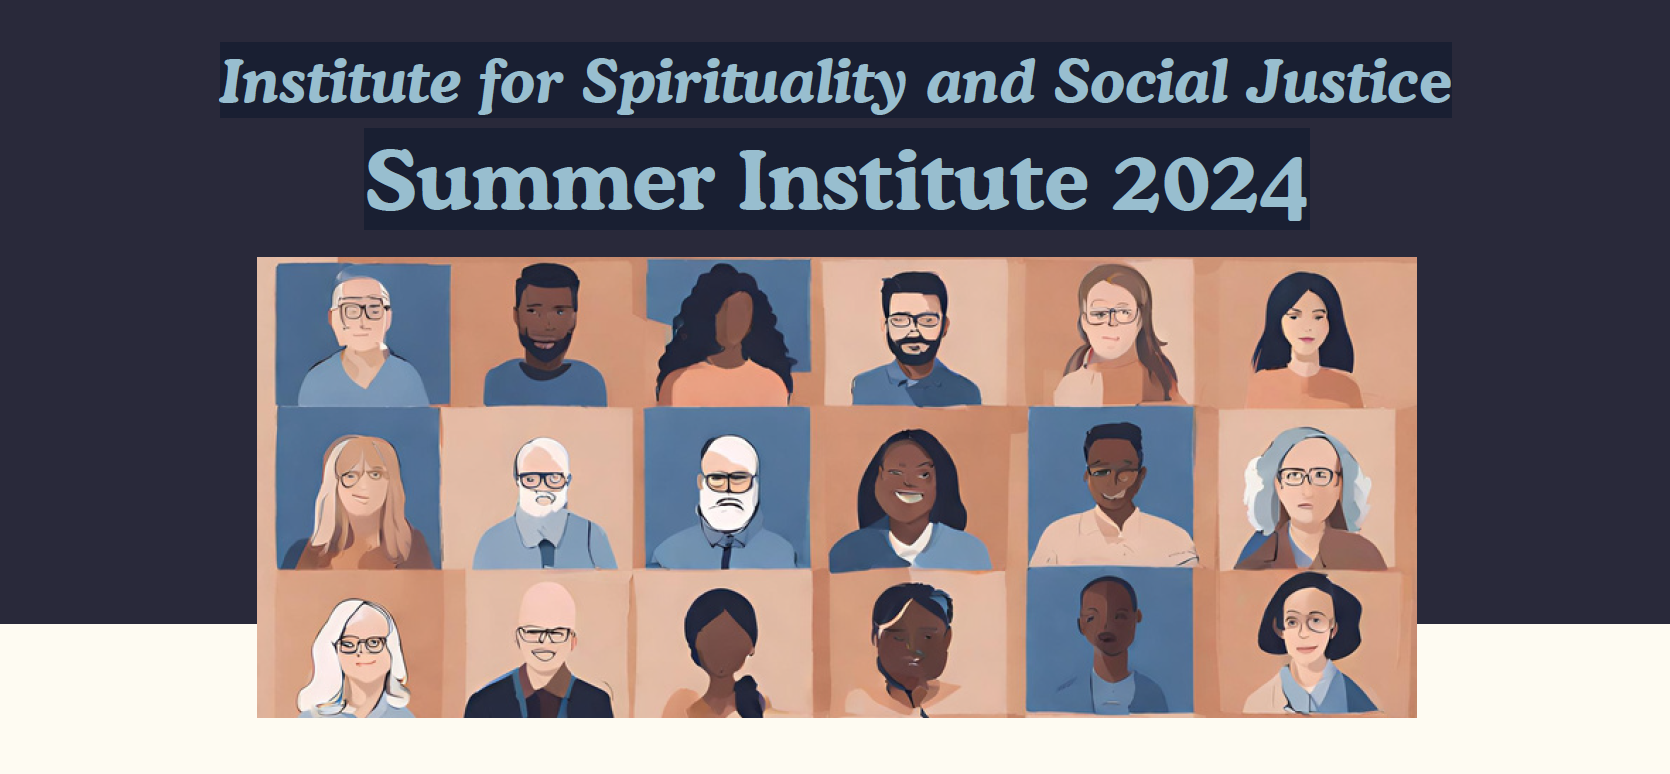 Summer institute for spirituality and social justice 2024